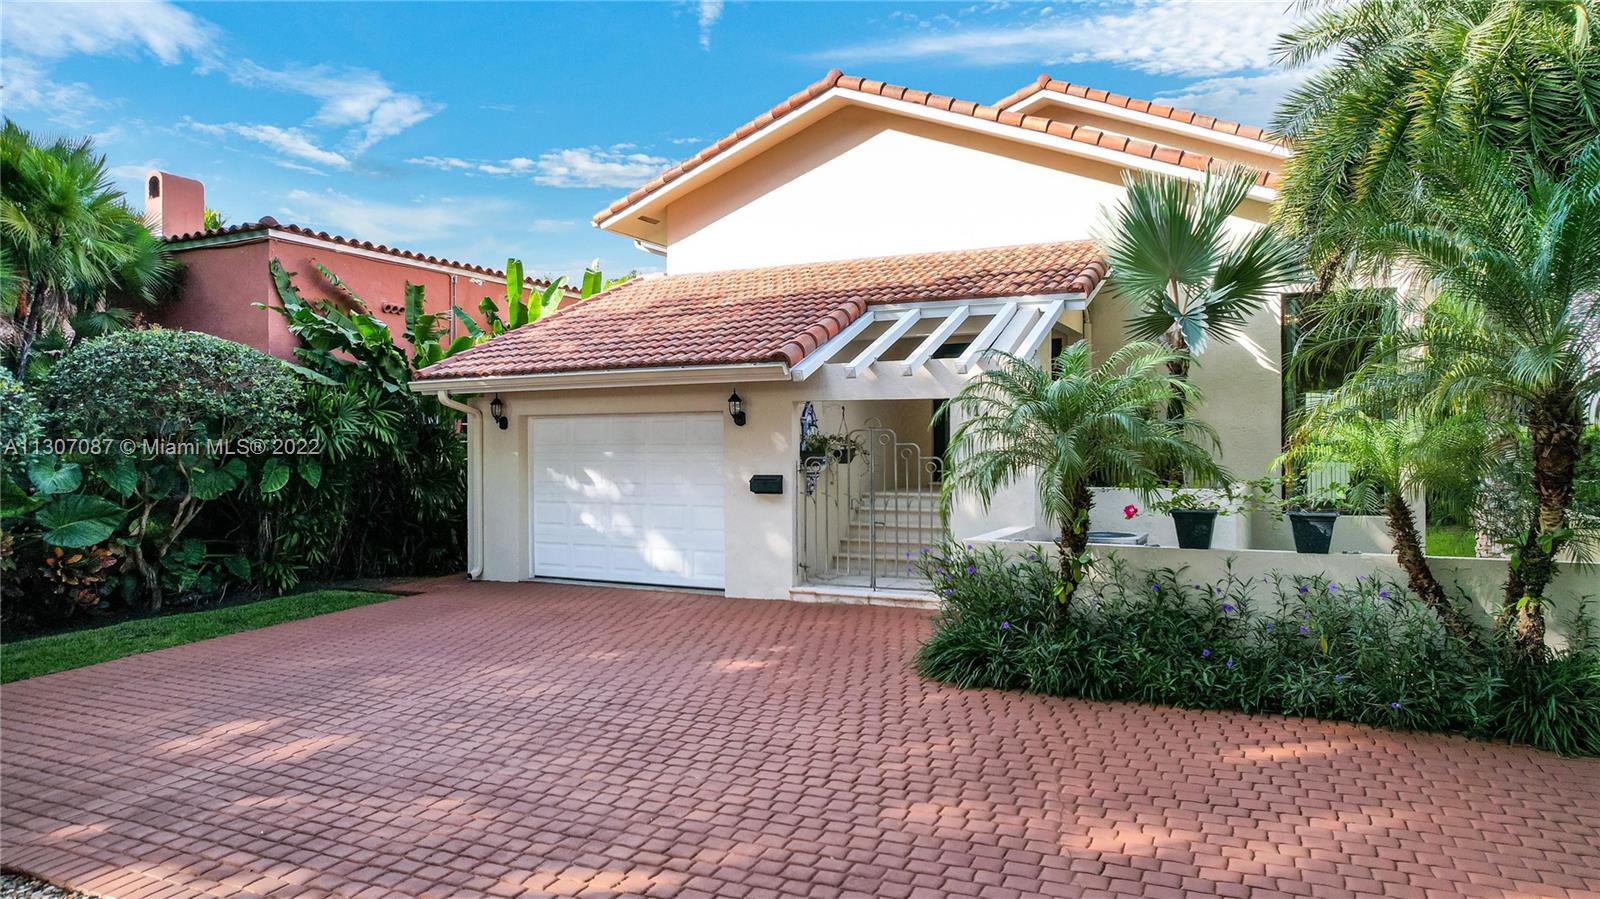 This 2-story Mediterranean-style home is located on one of the best tree-lined streets in Coral Gables and offers 4BR/4BA with 3,746 total SF. An elegant foyer opens to a dramatic living room with soaring ceilings, and formal dining room. Spacious kitchen with center island sports top-of-the-line appliances, granite countertops, an adjacent family room, plus billiard room with built-in bar. There is a bedroom downstairs and 3 bedrooms upstairs. The 2nd floor primary suite features a sitting area, ample walk-in closet & marble bathroom with separate tub and shower. Interior highlights include fine marble floors, and vaulted wood beam ceilings. Outdoor highlights include a covered terrace, large pool & spa ideal to relax and entertain. Located just minutes to Miracle Mile, Coconut Grove,